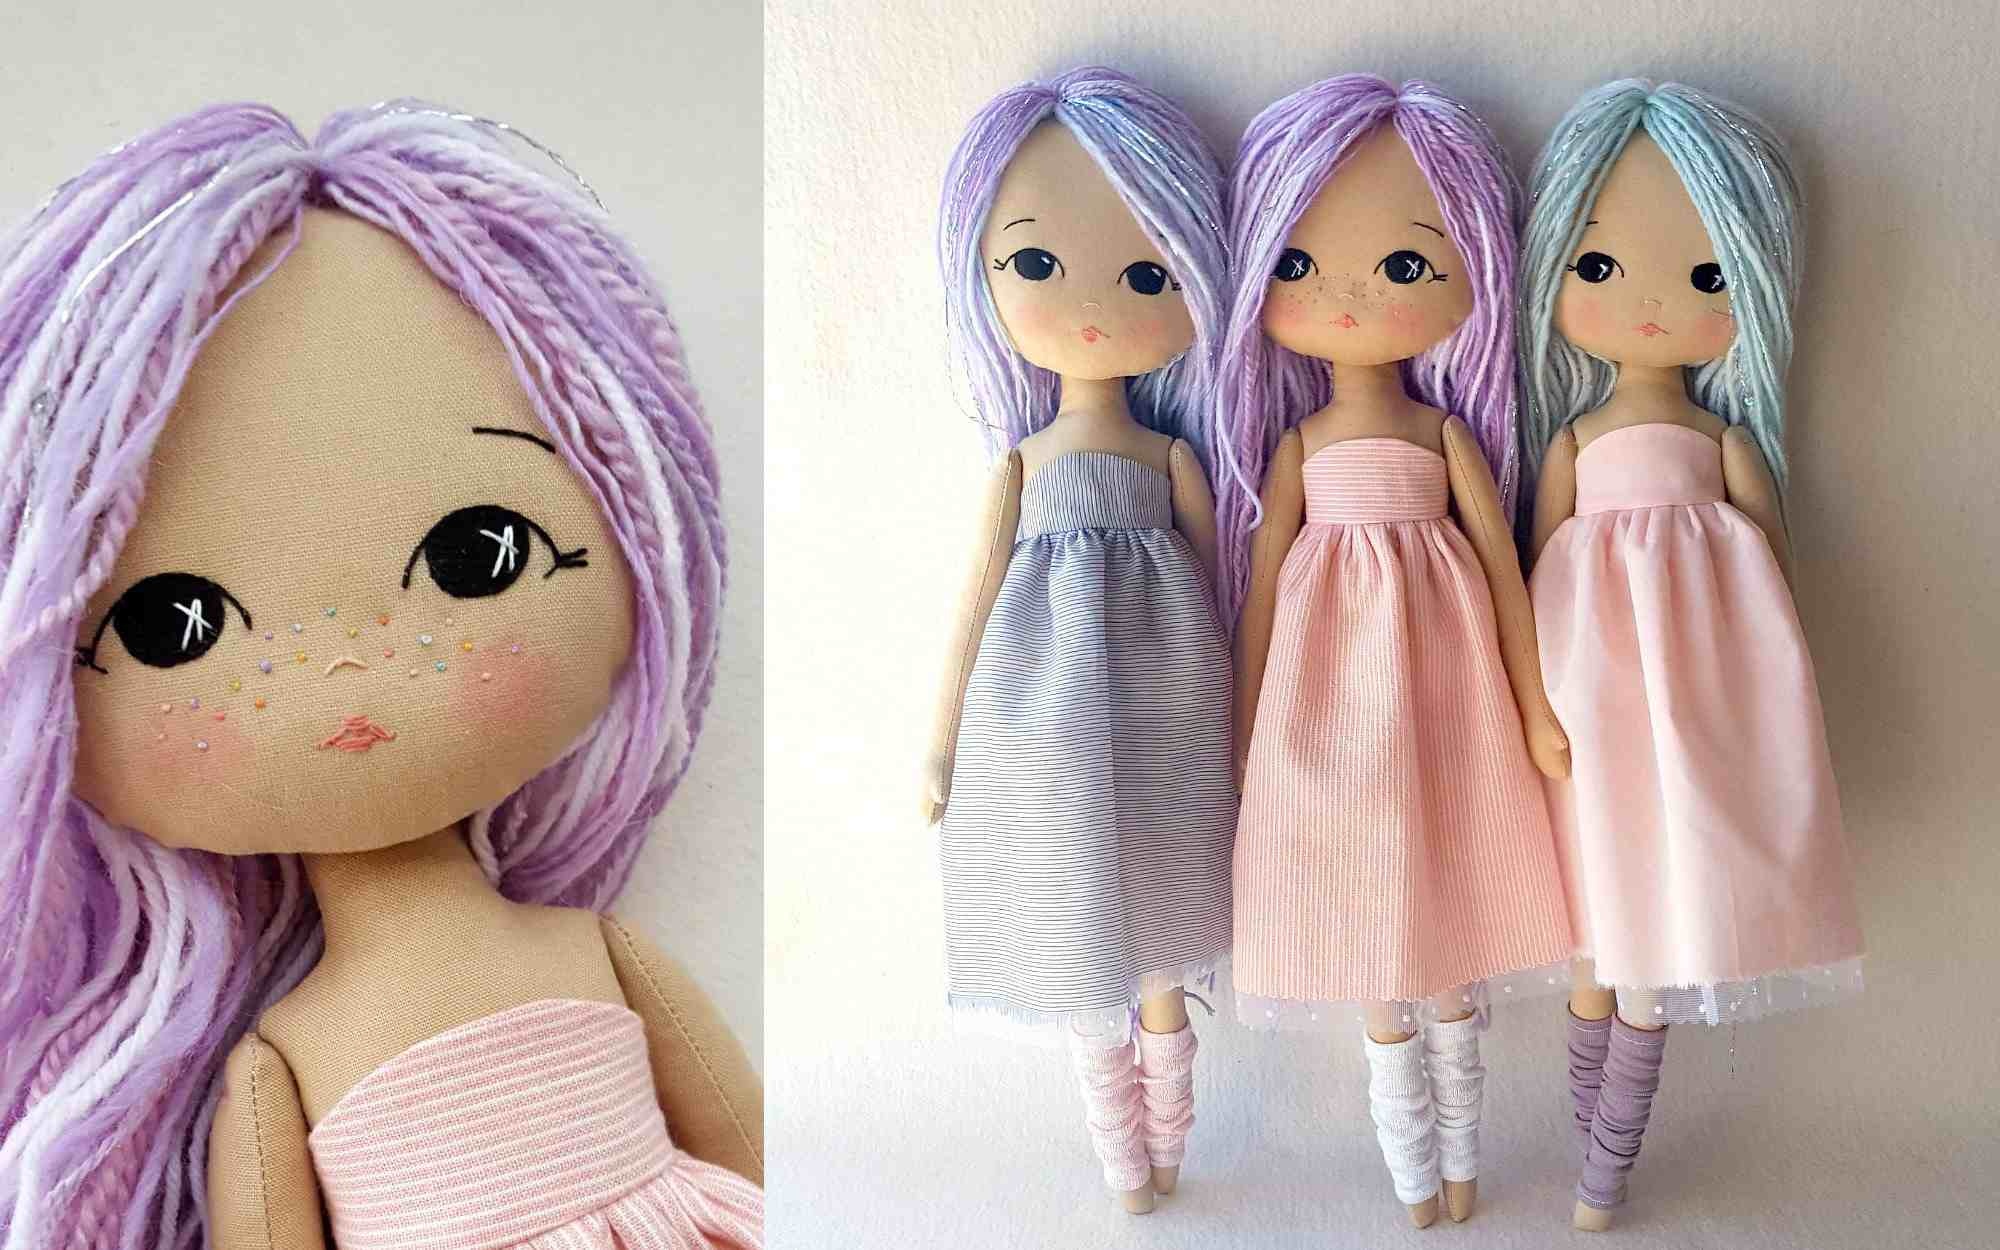 The 22 Best Doll Sewing Patterns - Free Printable Rag Doll Patterns